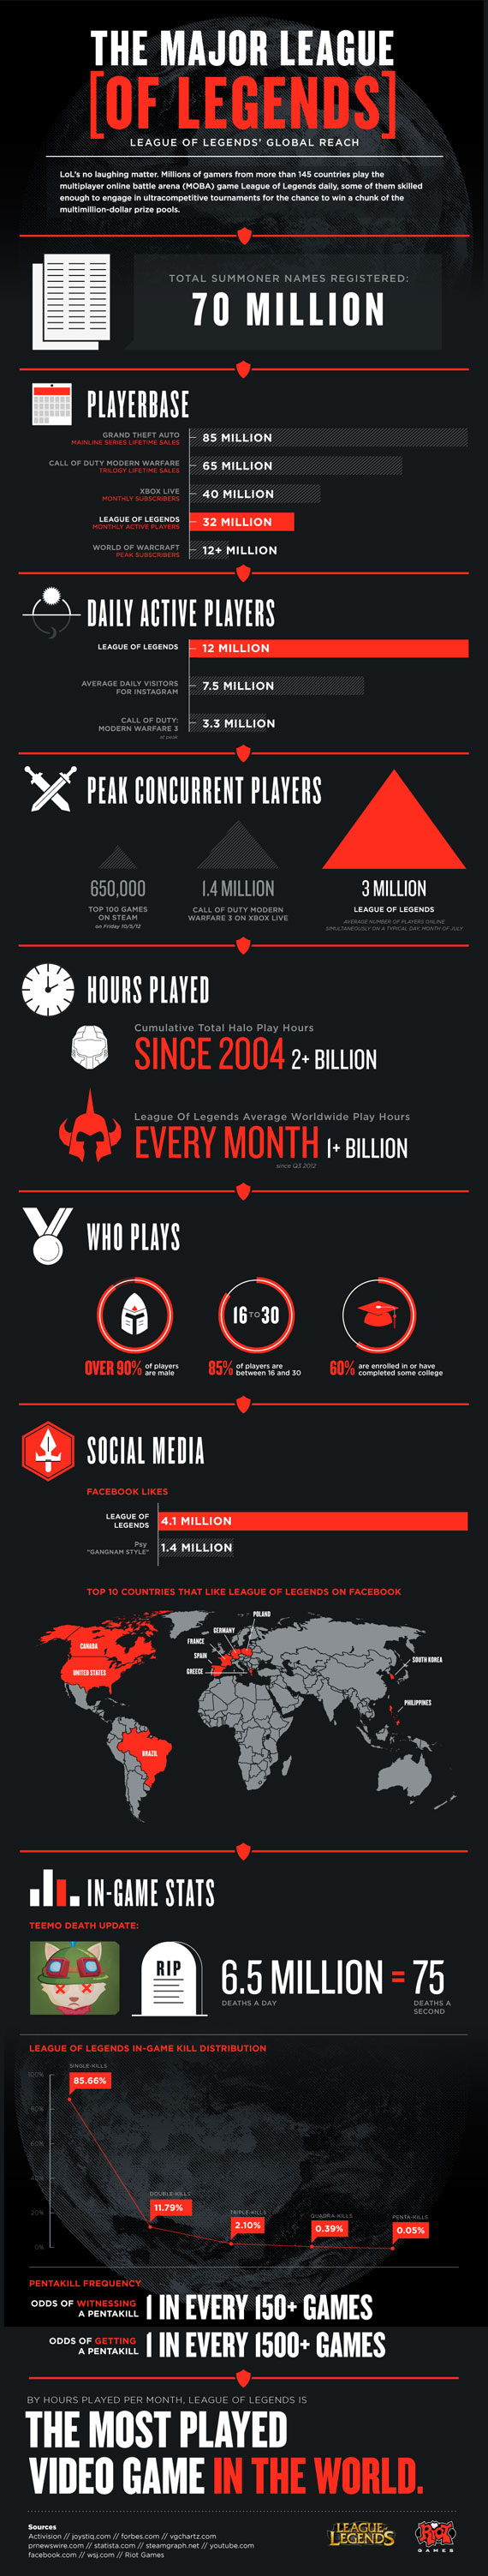 League of Legends Season 2 Tournament Concluded with $1M Winners! [INFOGRAPHIC], Game Crazy